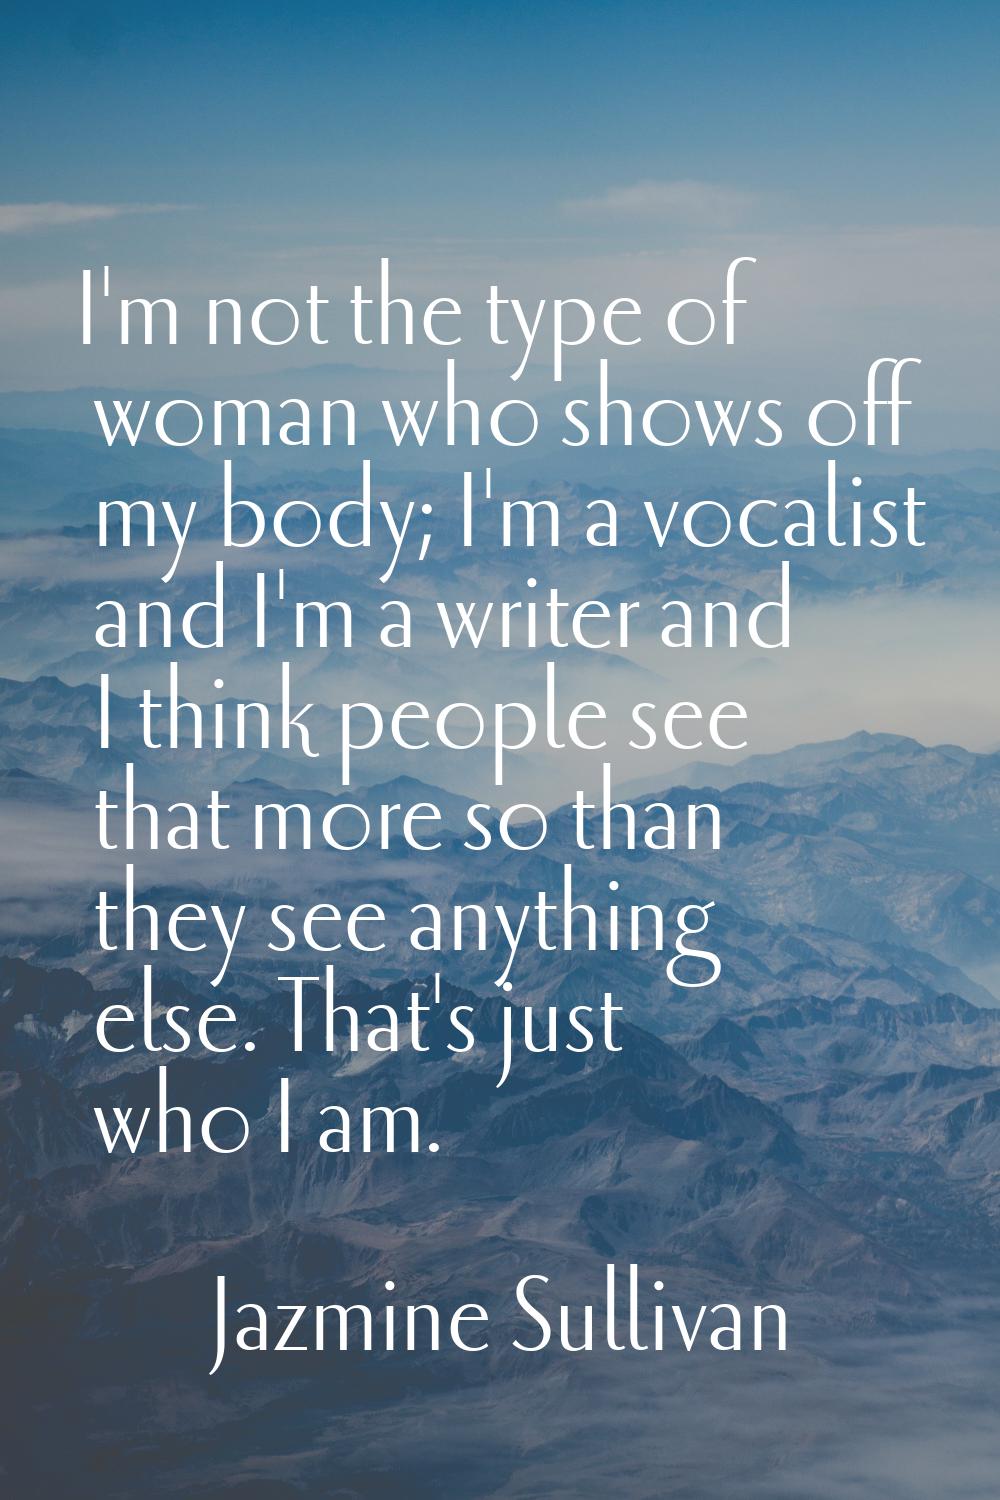 I'm not the type of woman who shows off my body; I'm a vocalist and I'm a writer and I think people